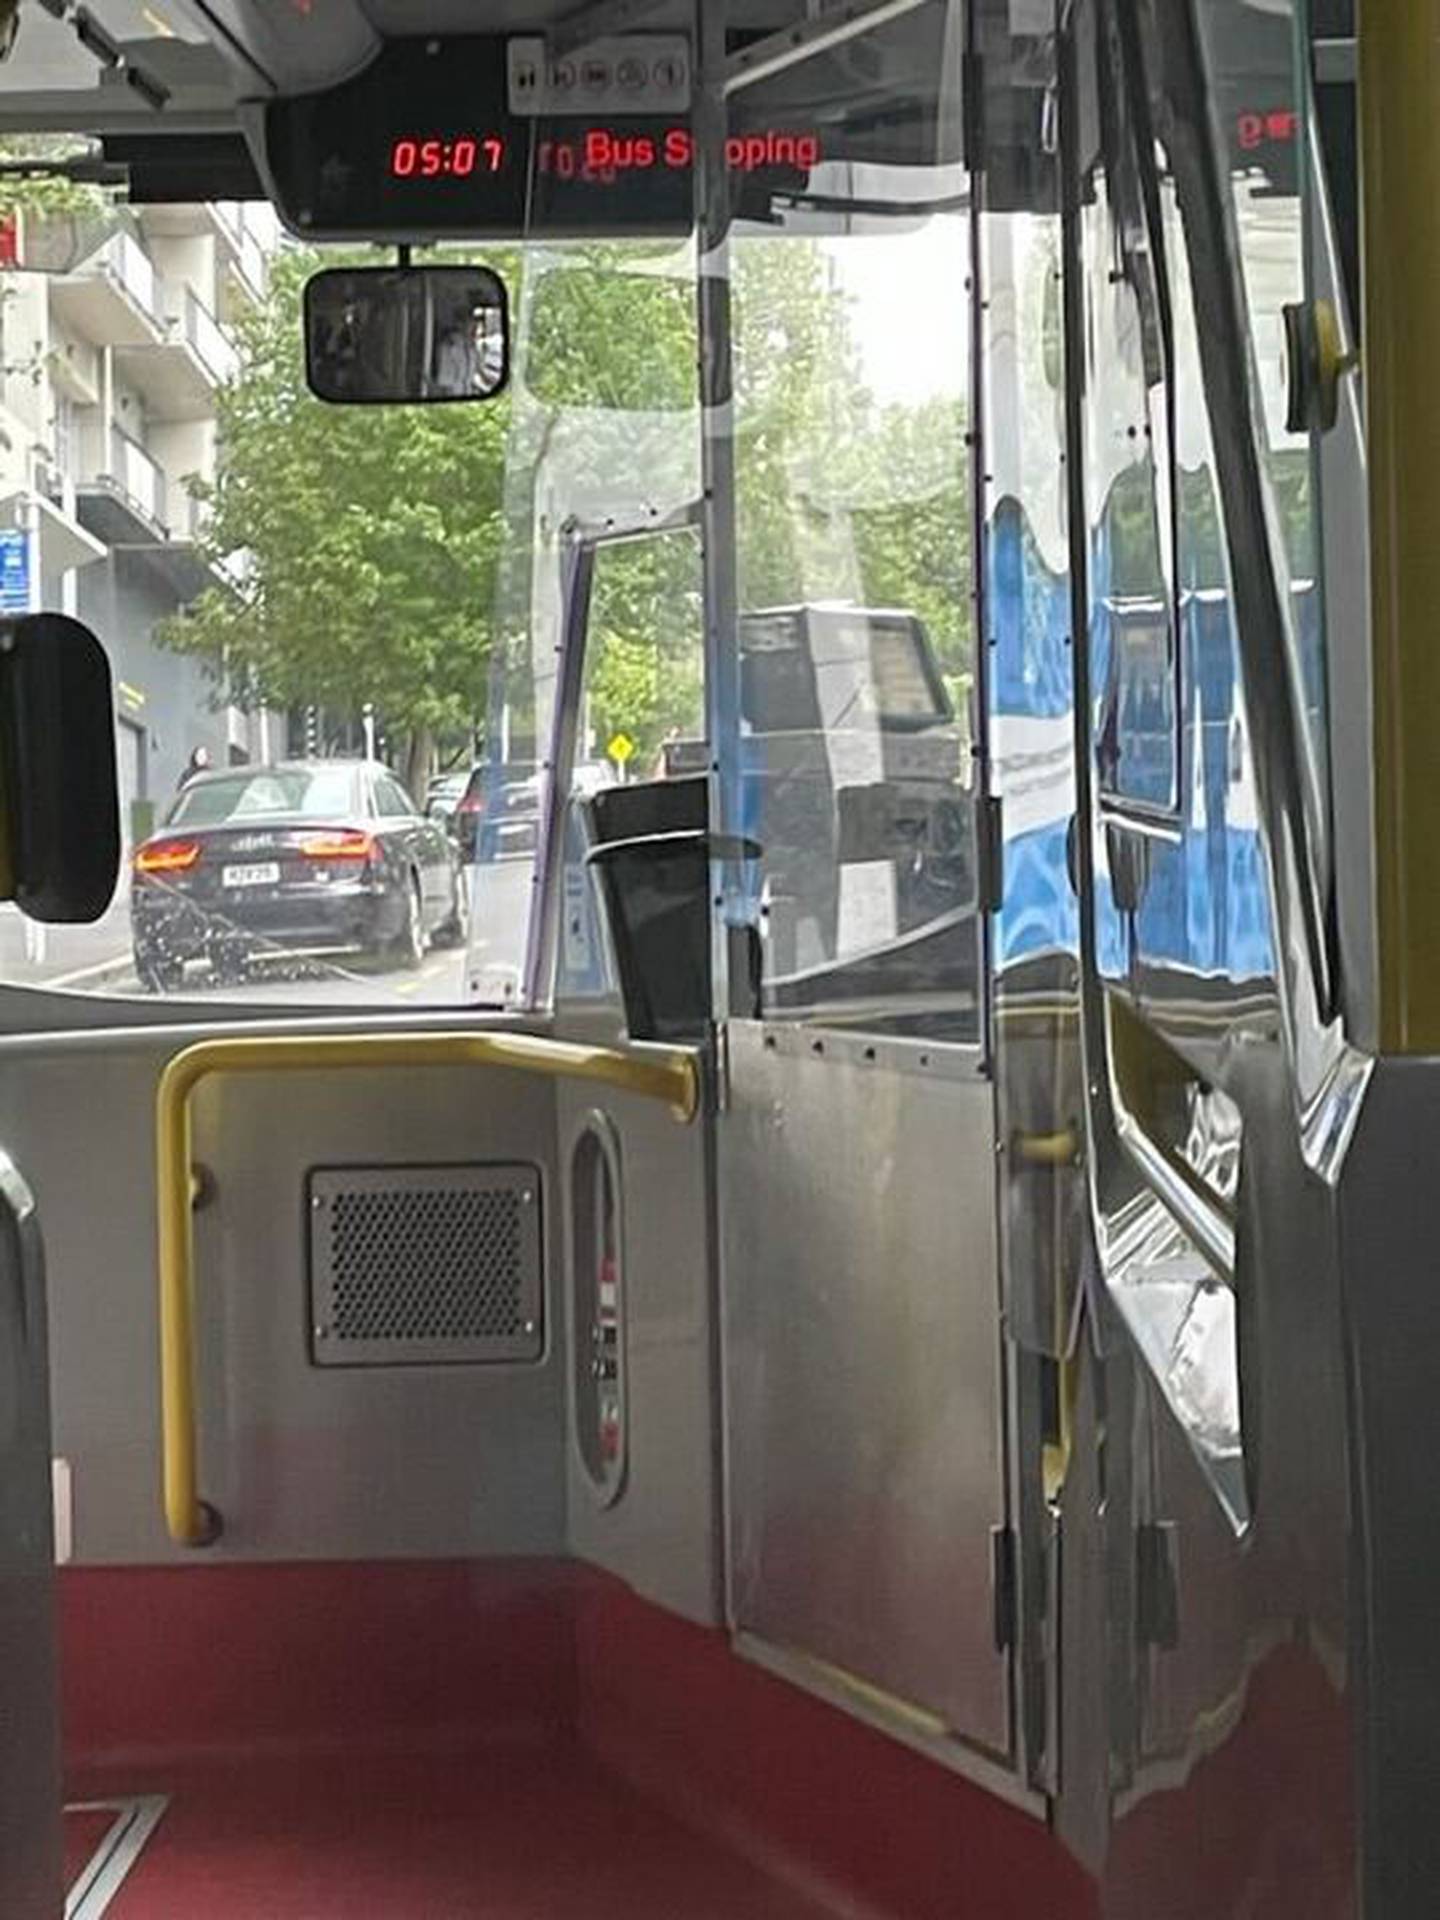 Auckland Transport (AT) is rolling out screen dividers on buses, separating drivers from passengers after at least two stabbings on the city’s buses this year. Photo / NZME